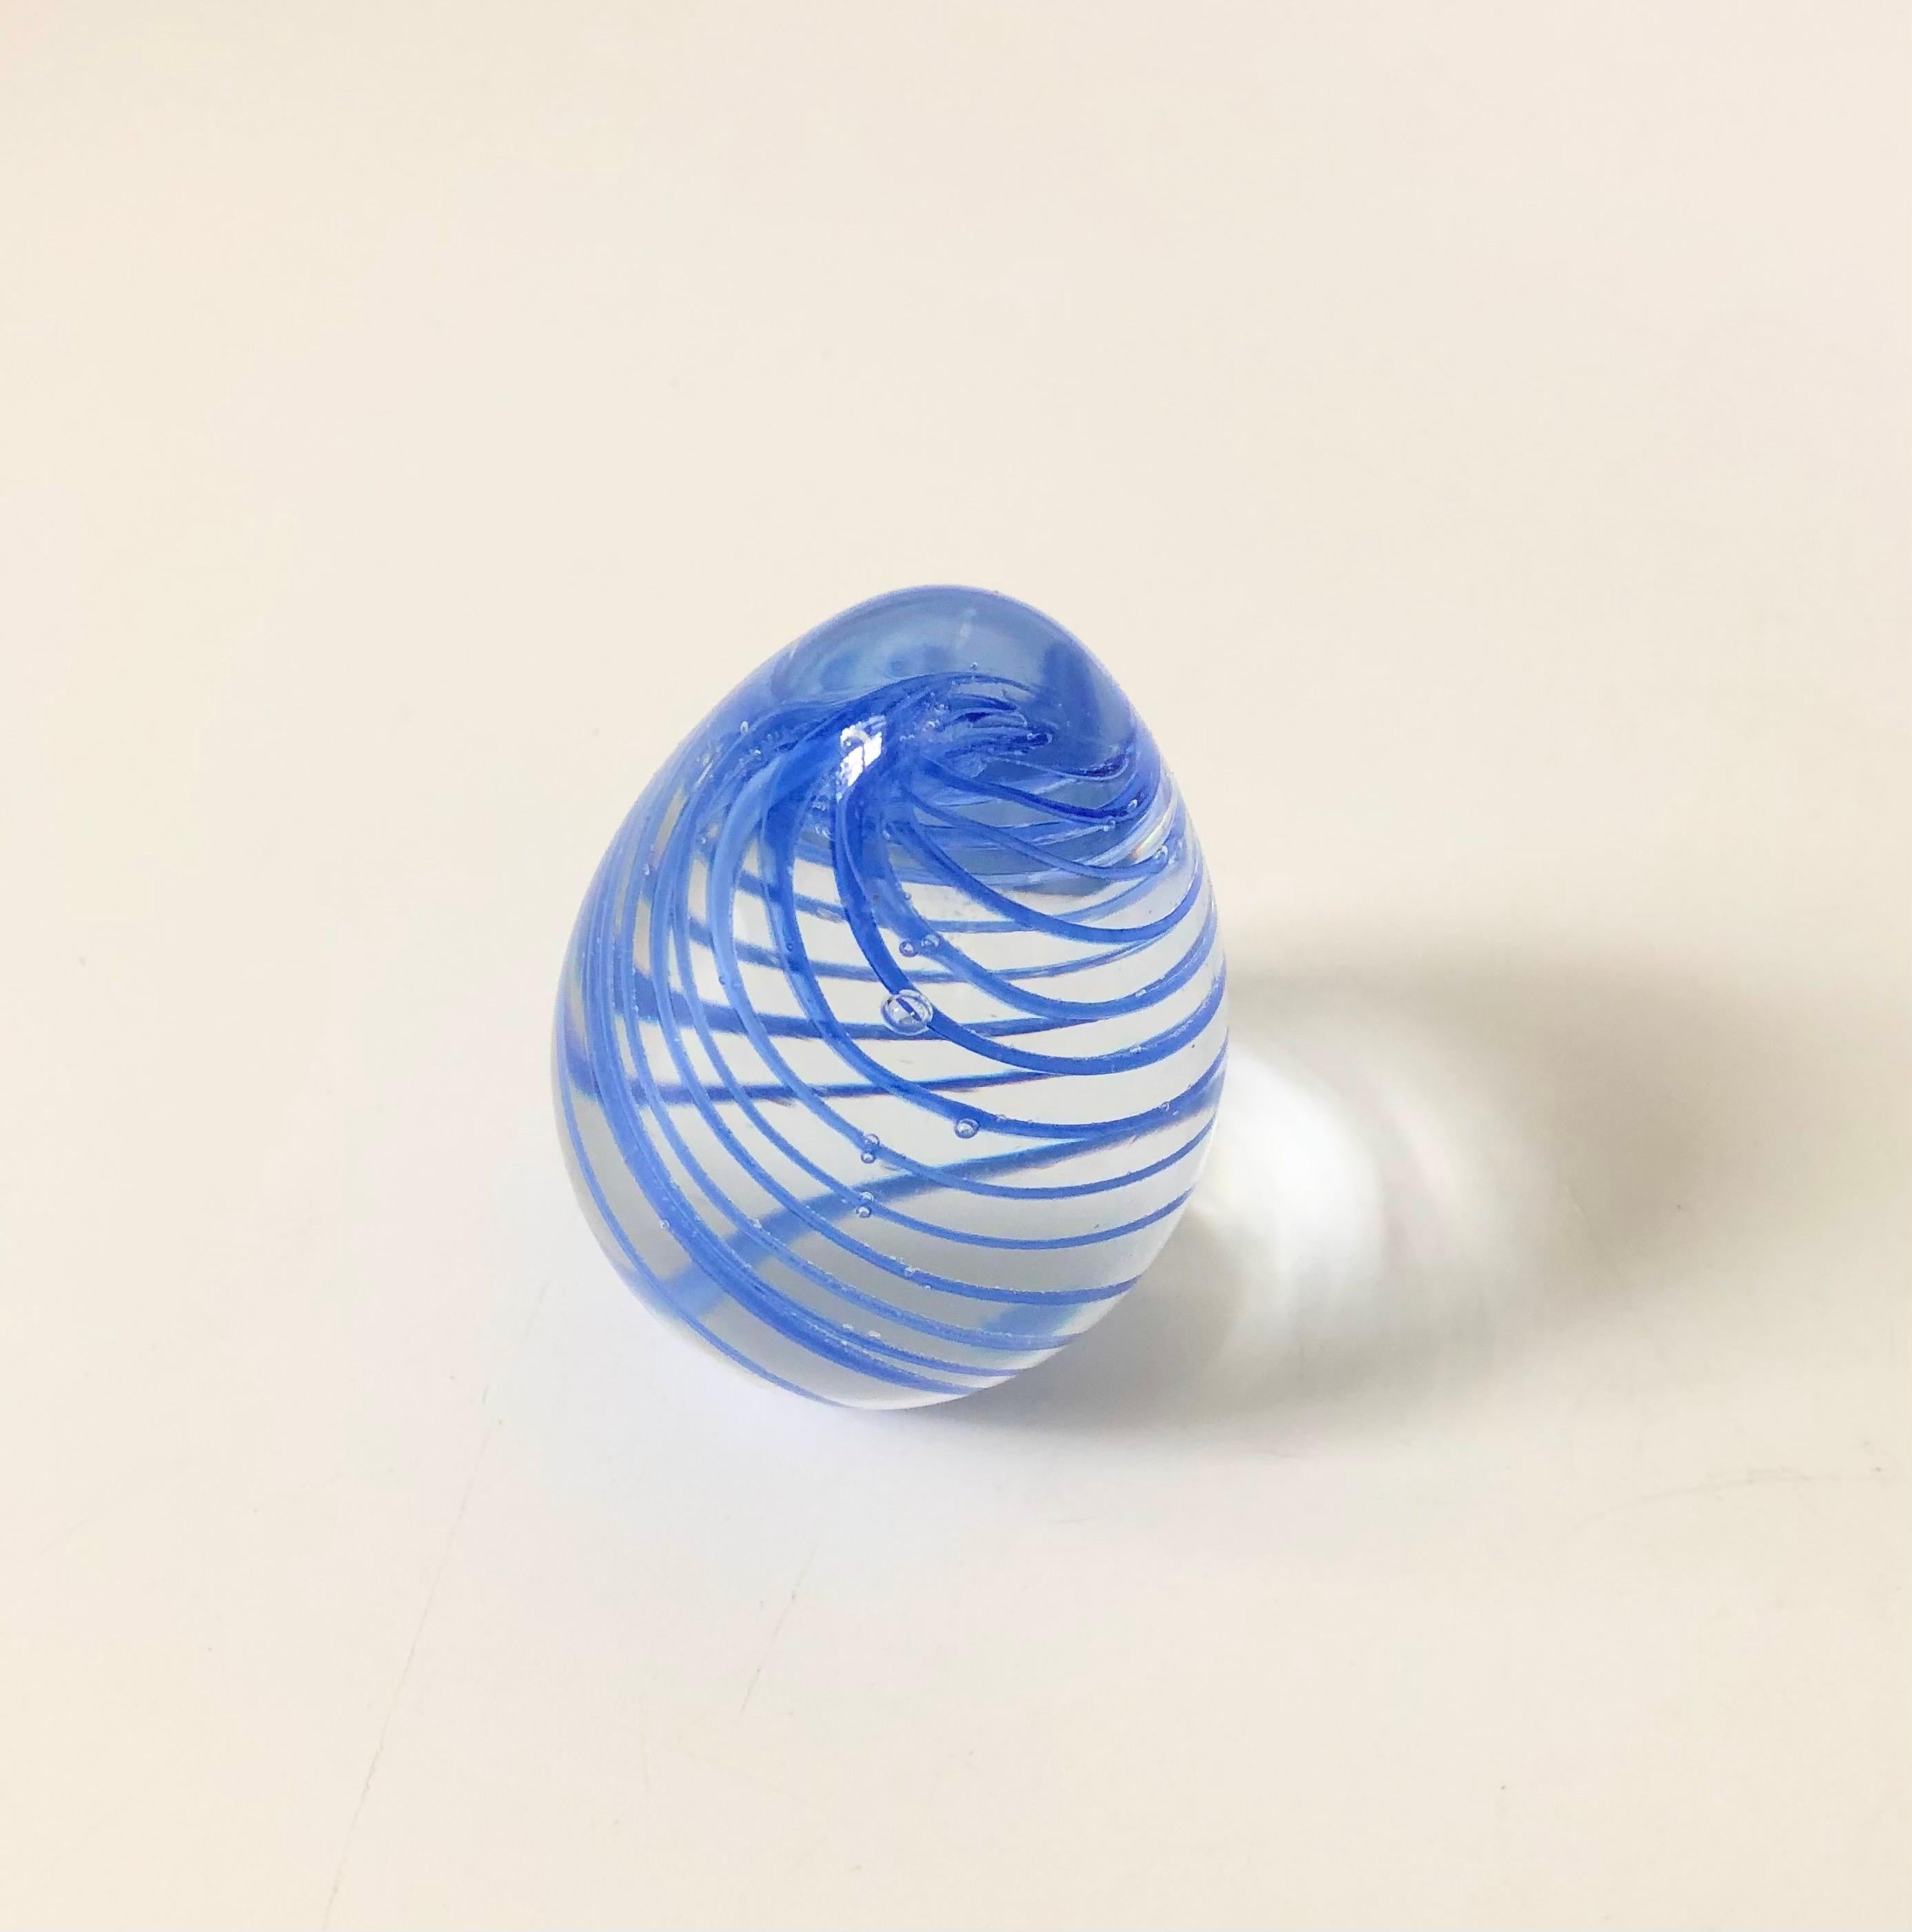 A vintage egg shaped art glass paperweight, with a beautiful swirl of periwinkle color in the center.
  